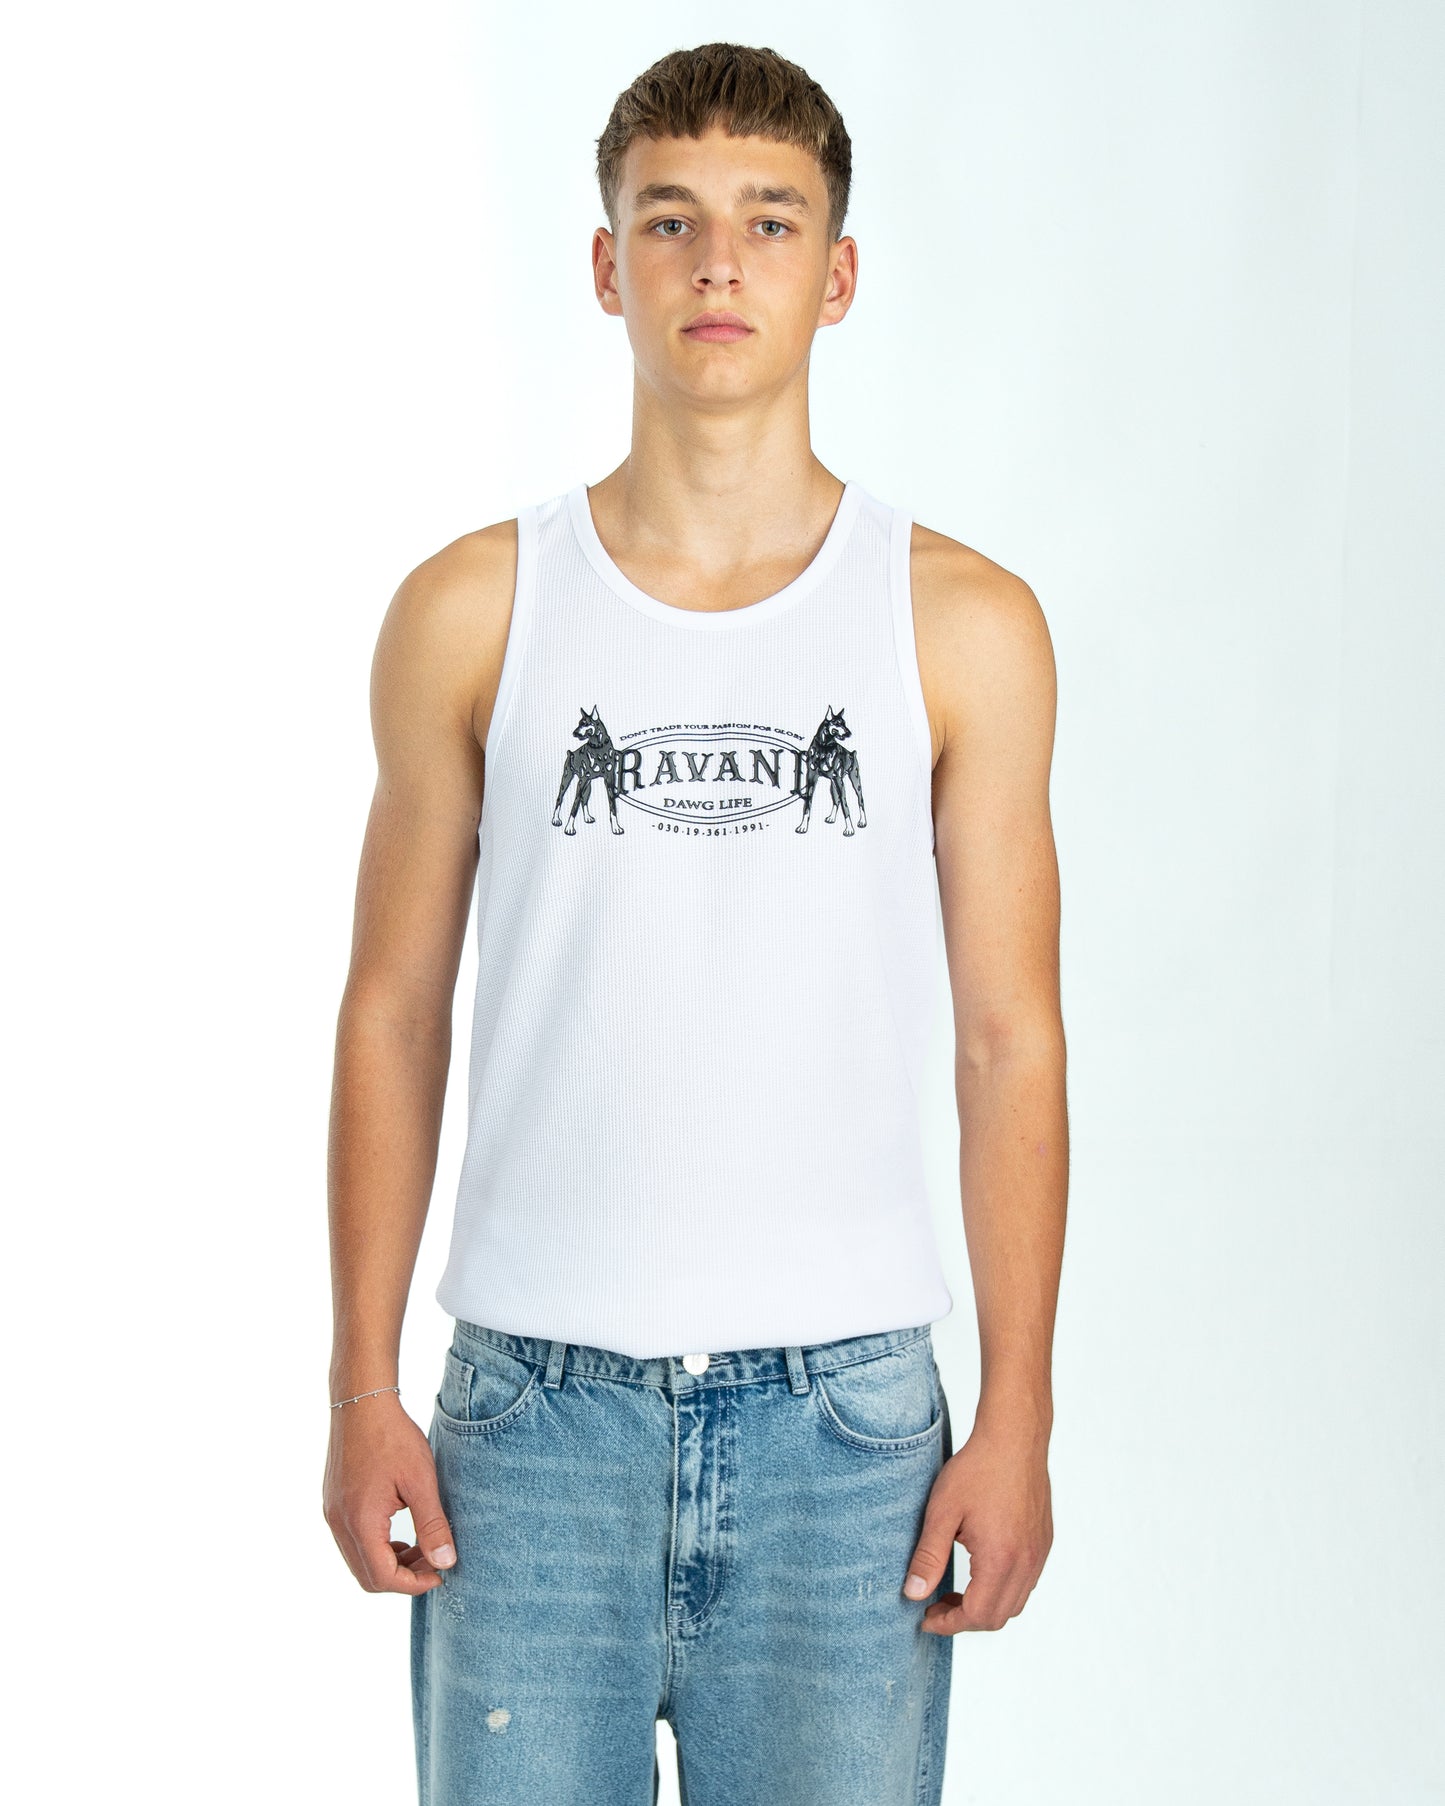 Dawg Life Tank Top White 2.0